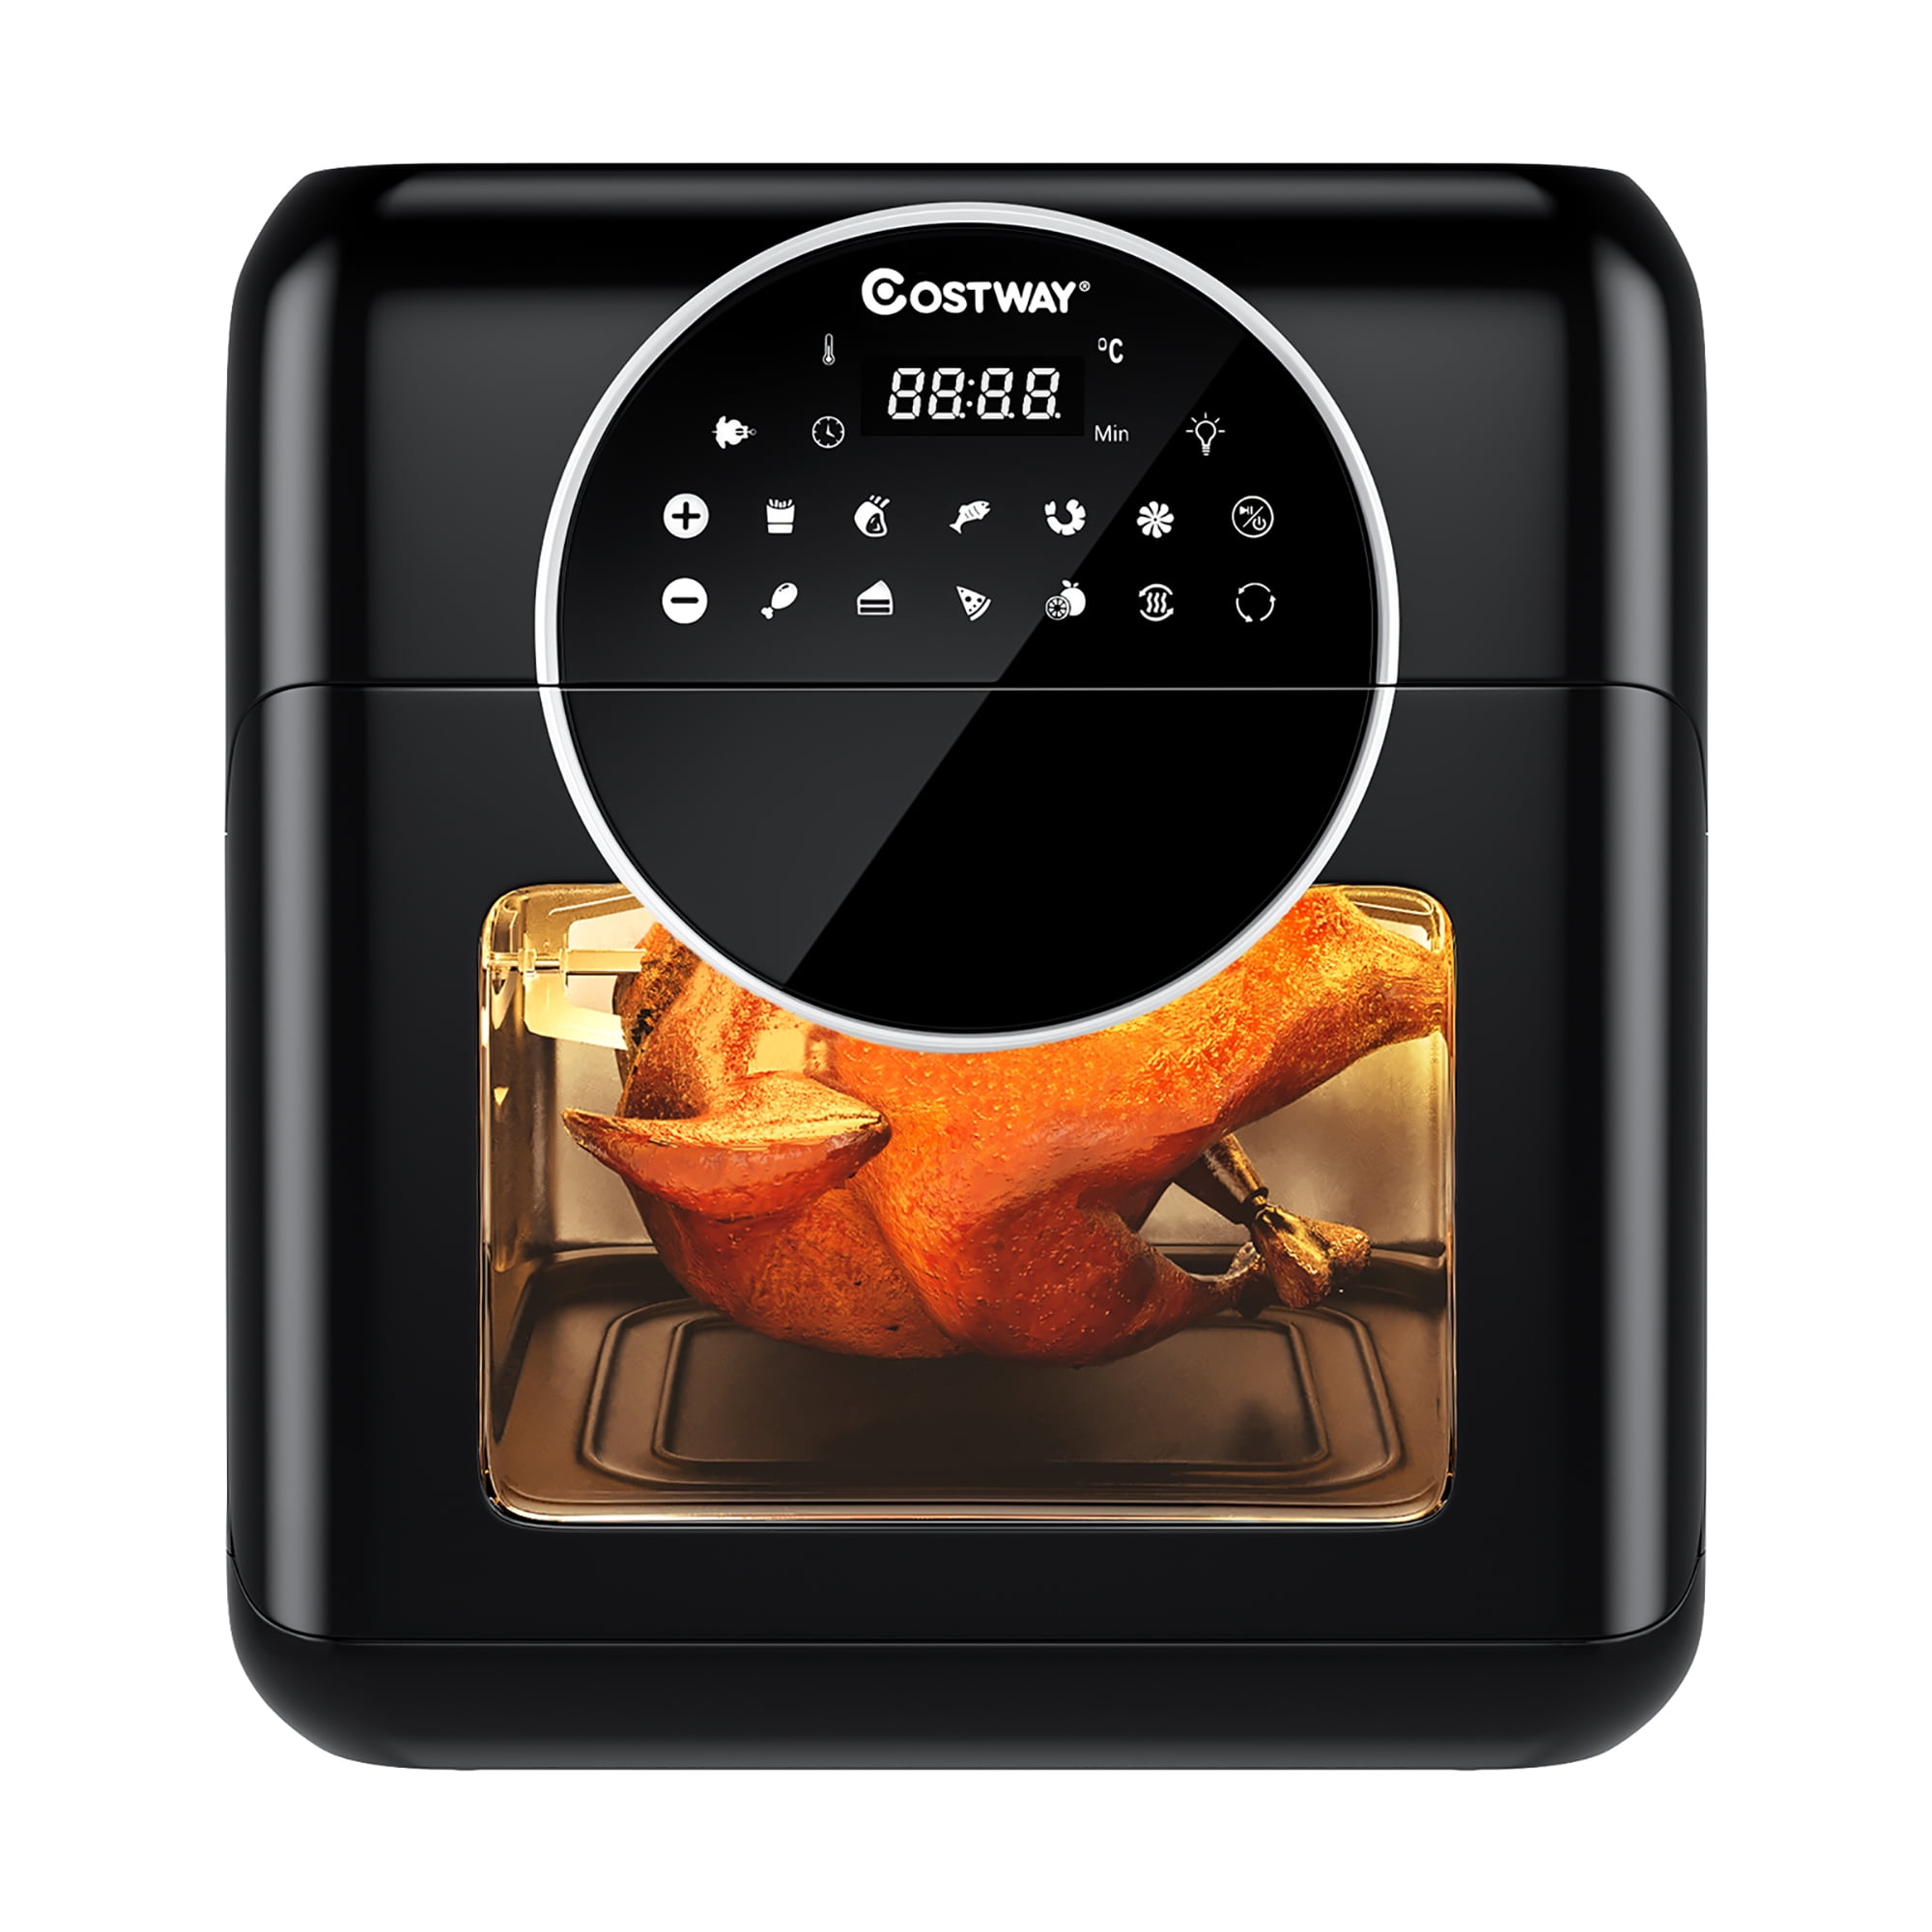 Yeeyo Electric Air Fryer Rotisserie Oven,,10-in-1 Fryer 12 Litre 1500W for  Home Use, Includes 10 Cooking Presets, Recipe Book & Cooker Accessories